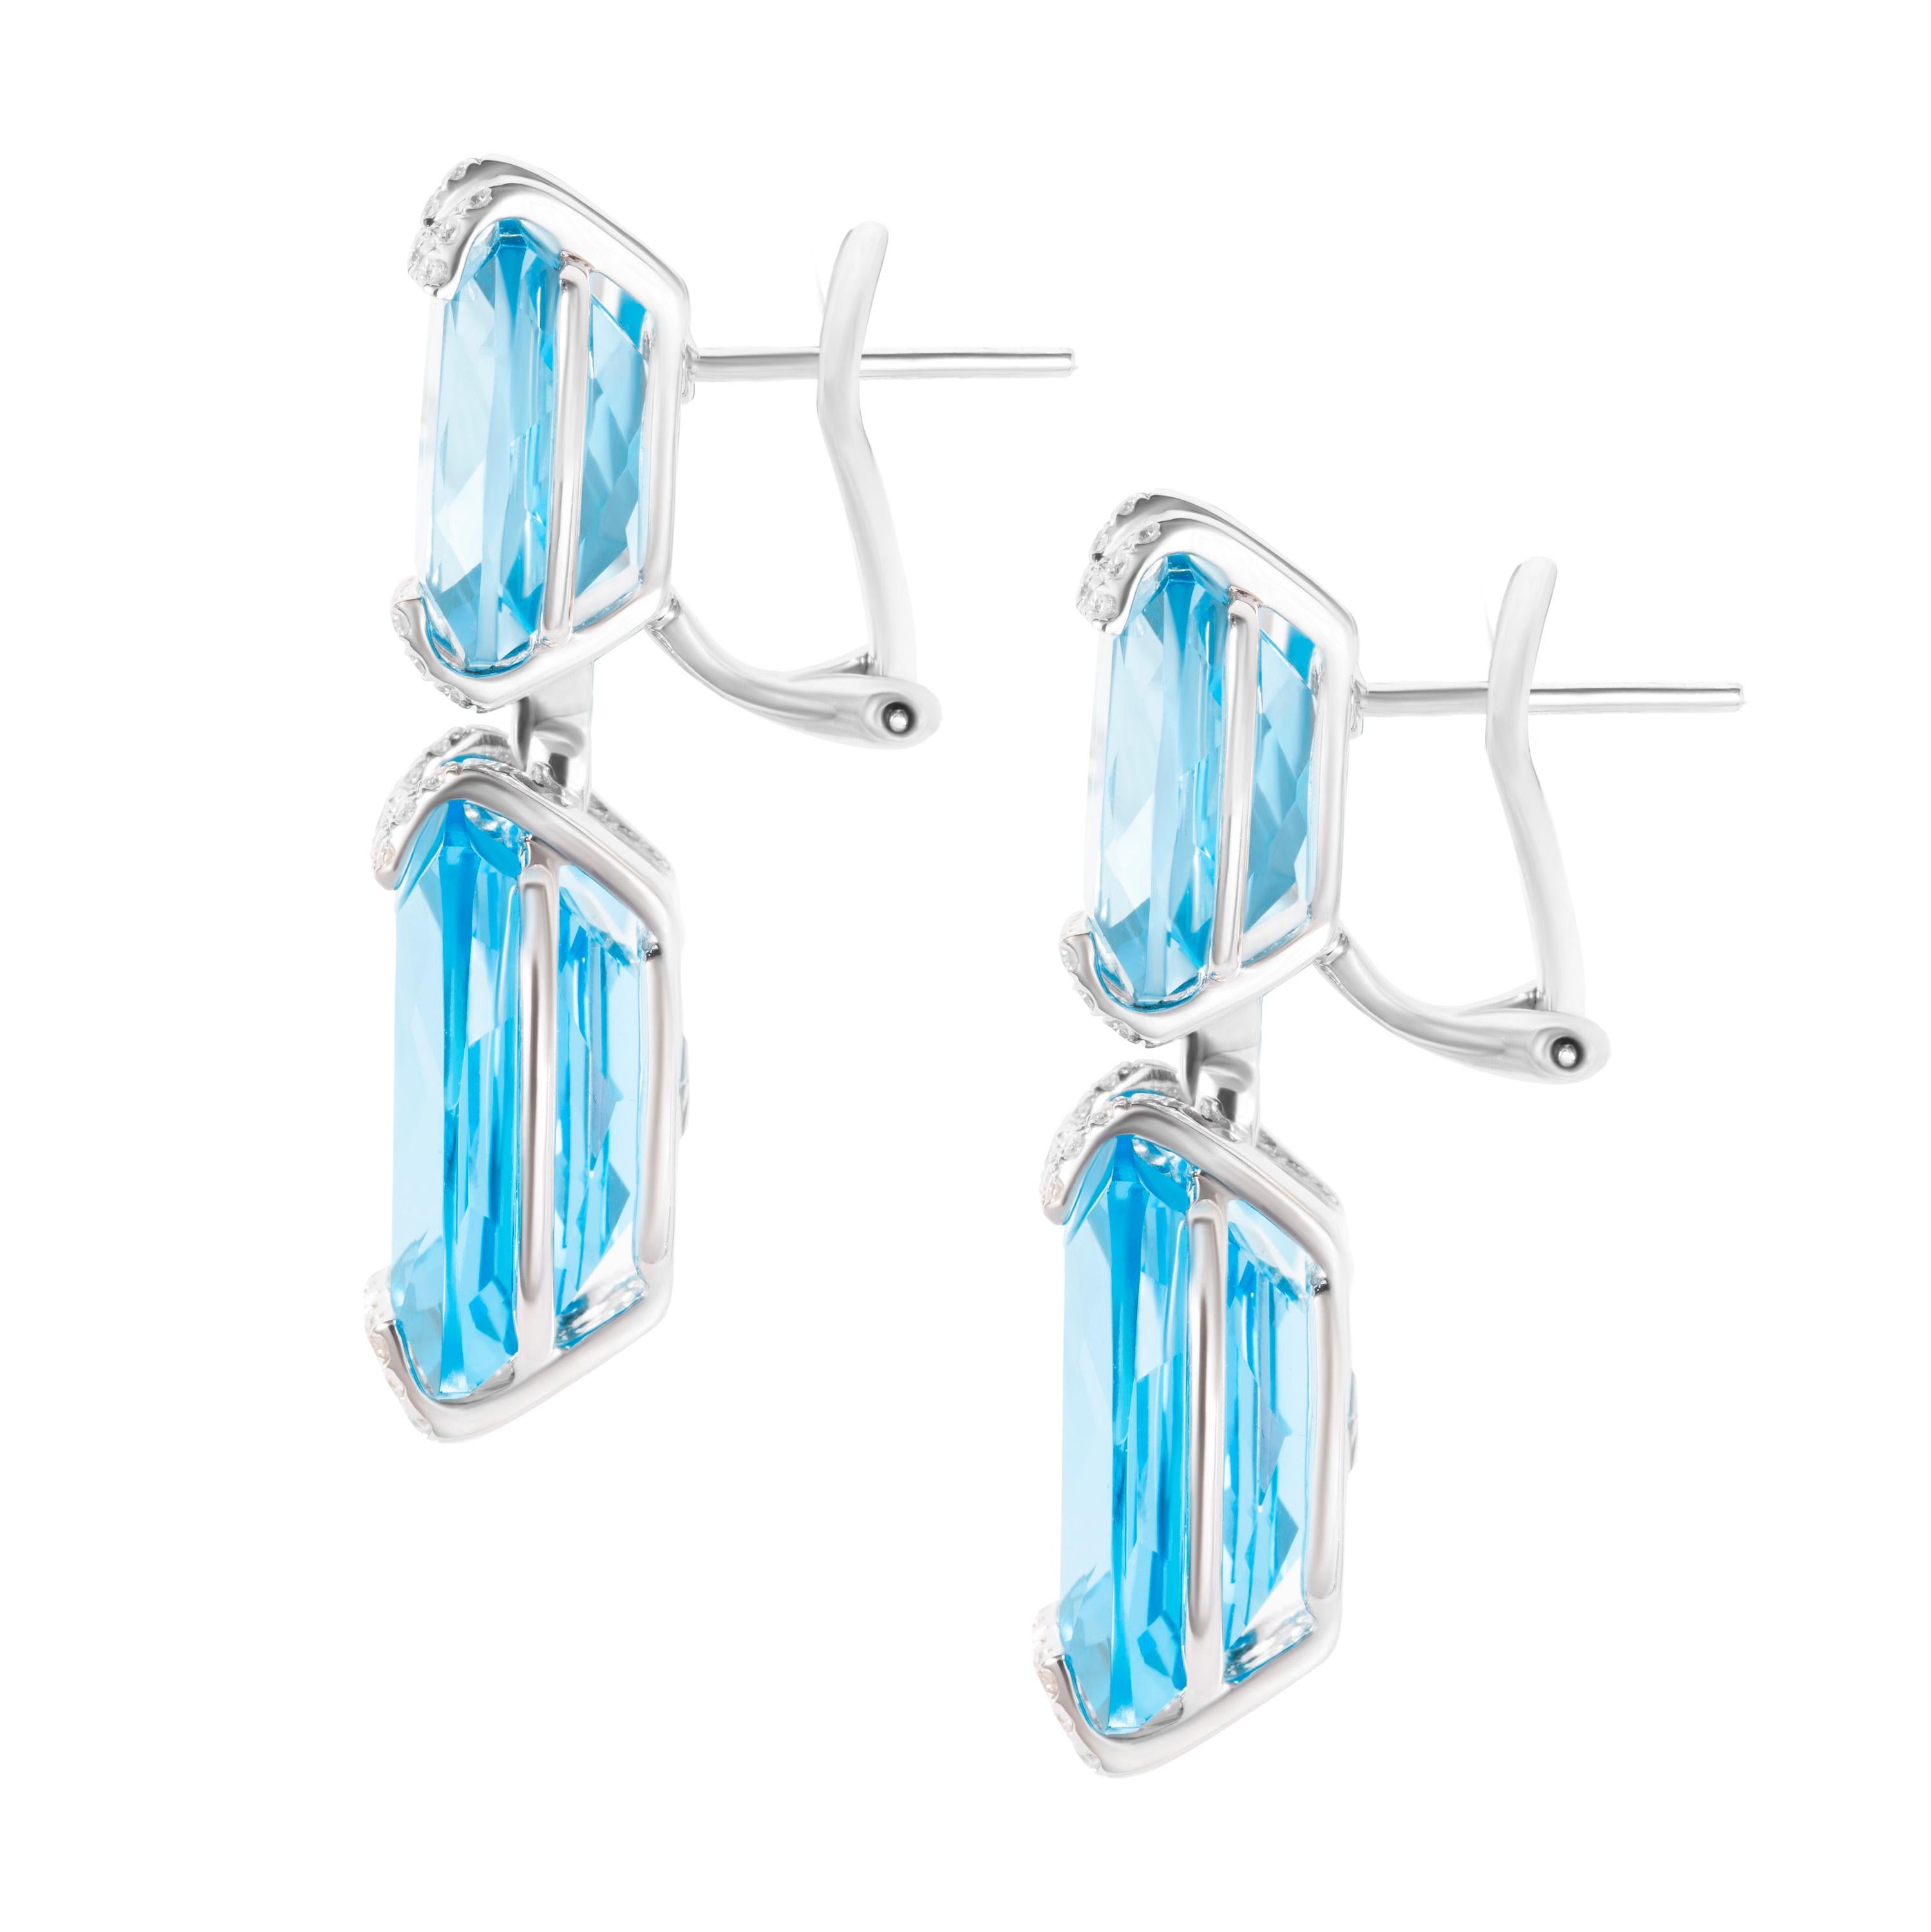 Set in 18K white gold, these drop earrings feature four cushion-cut blue topaz gemstones (total carat weight 53.96 carats) and accented with 0.44 carats of brilliant round diamonds.  Earring length 3.5cm.

Composition: 
18K White Gold 
4 Cushion-cut